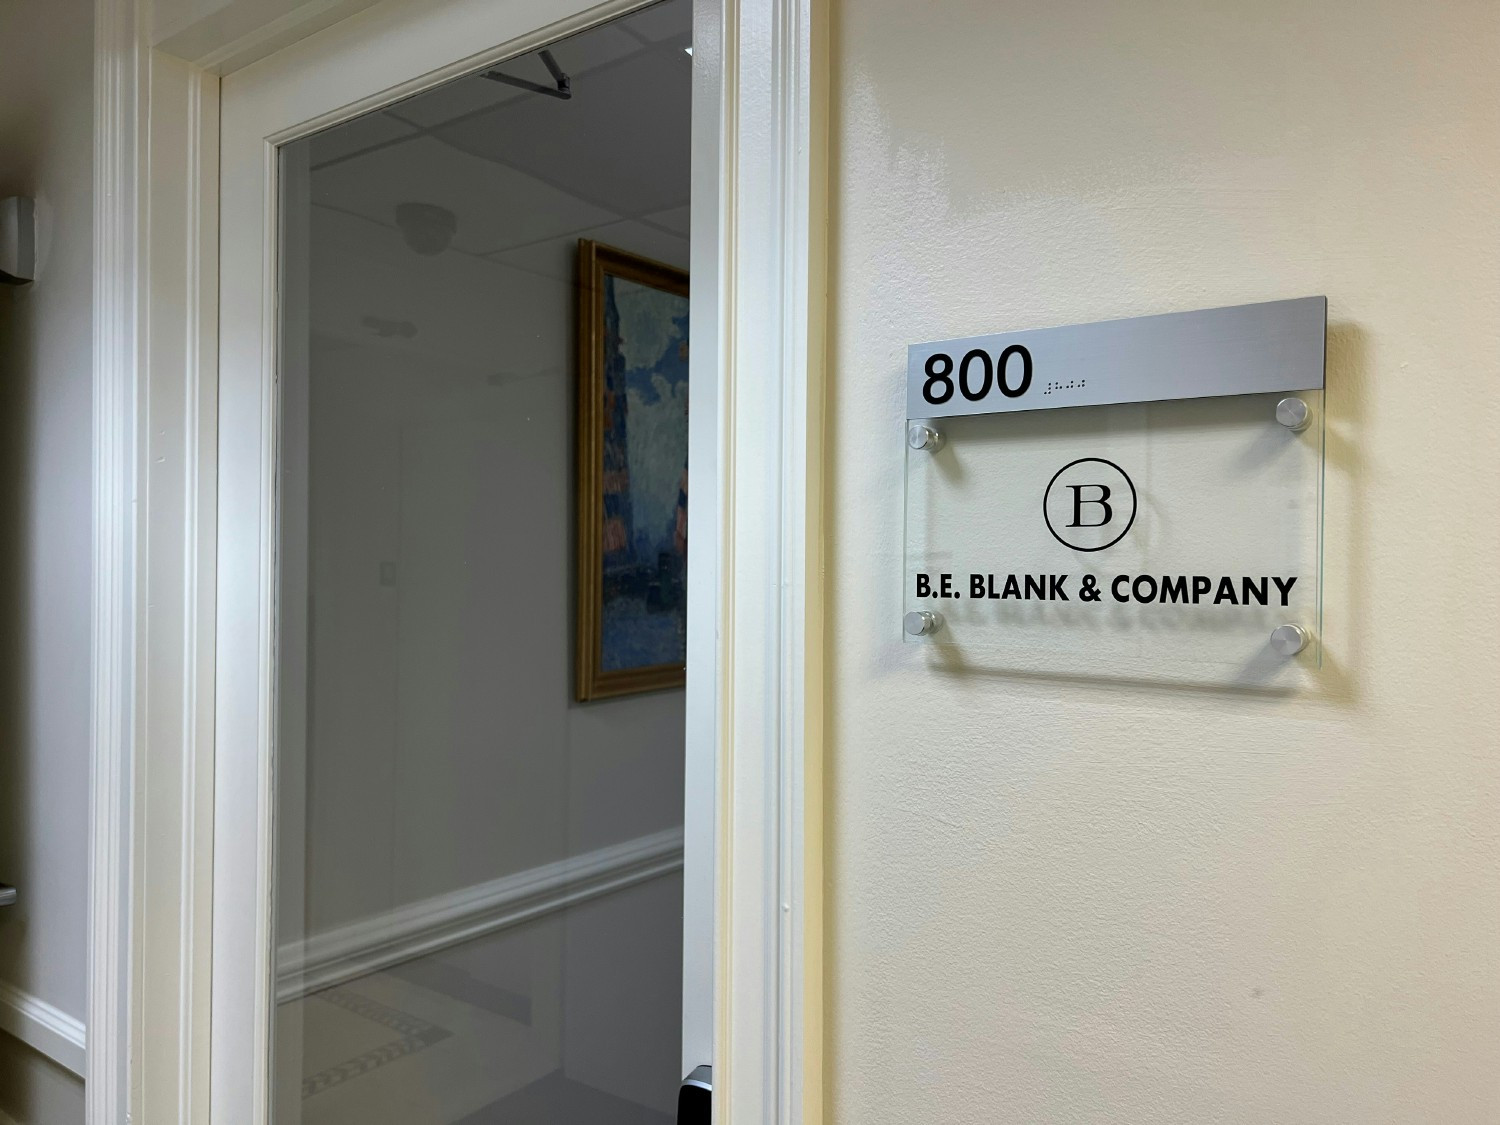 B.E. Blank & Company headquarters are located in downtown West Palm Beach, FL.  